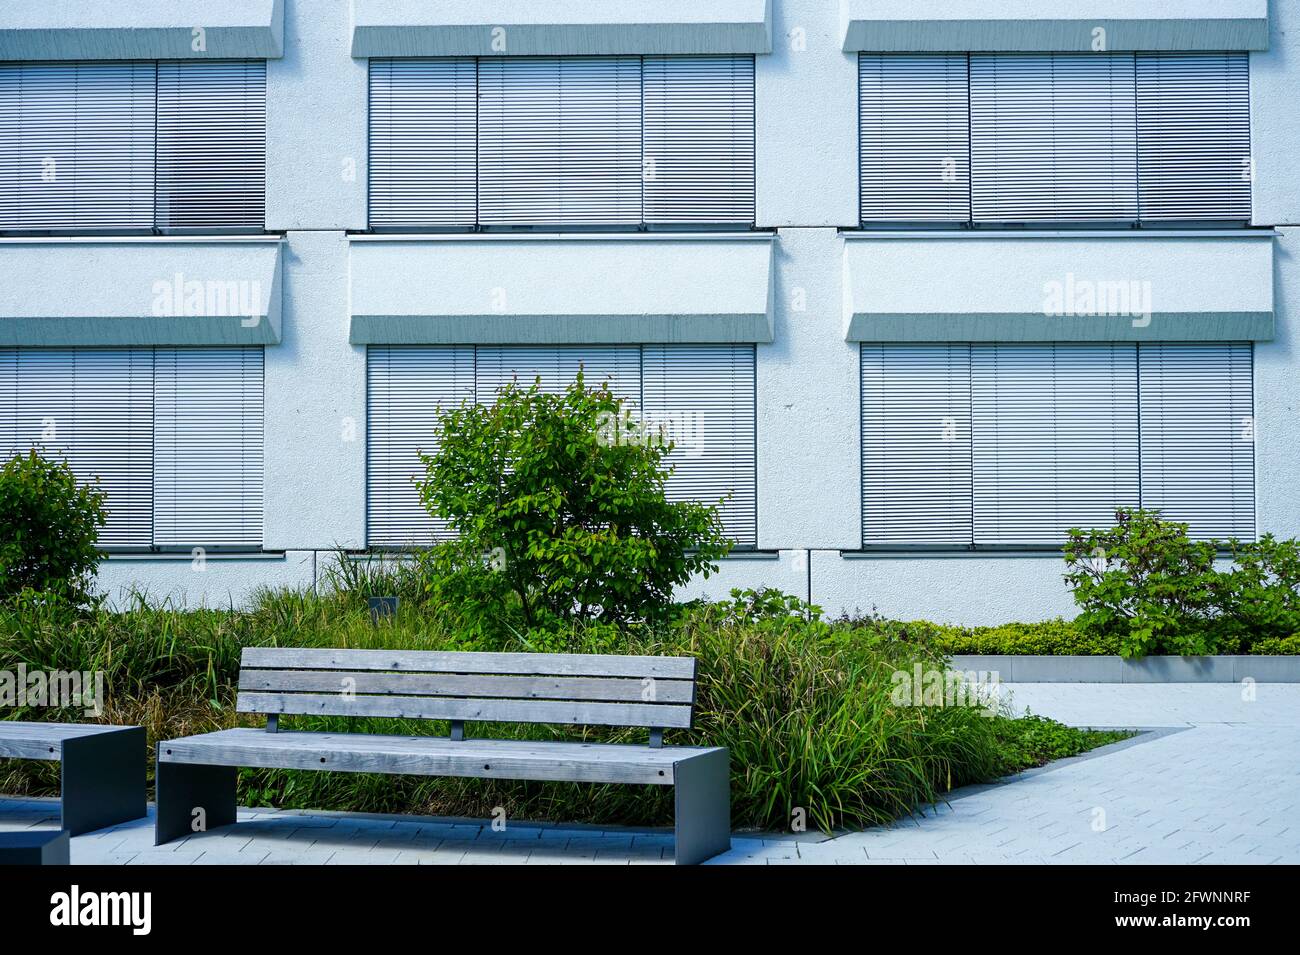 View of the beautifully landscaped inner courtyard of the 'Das Leuchtenberg' office building complex. Stock Photo